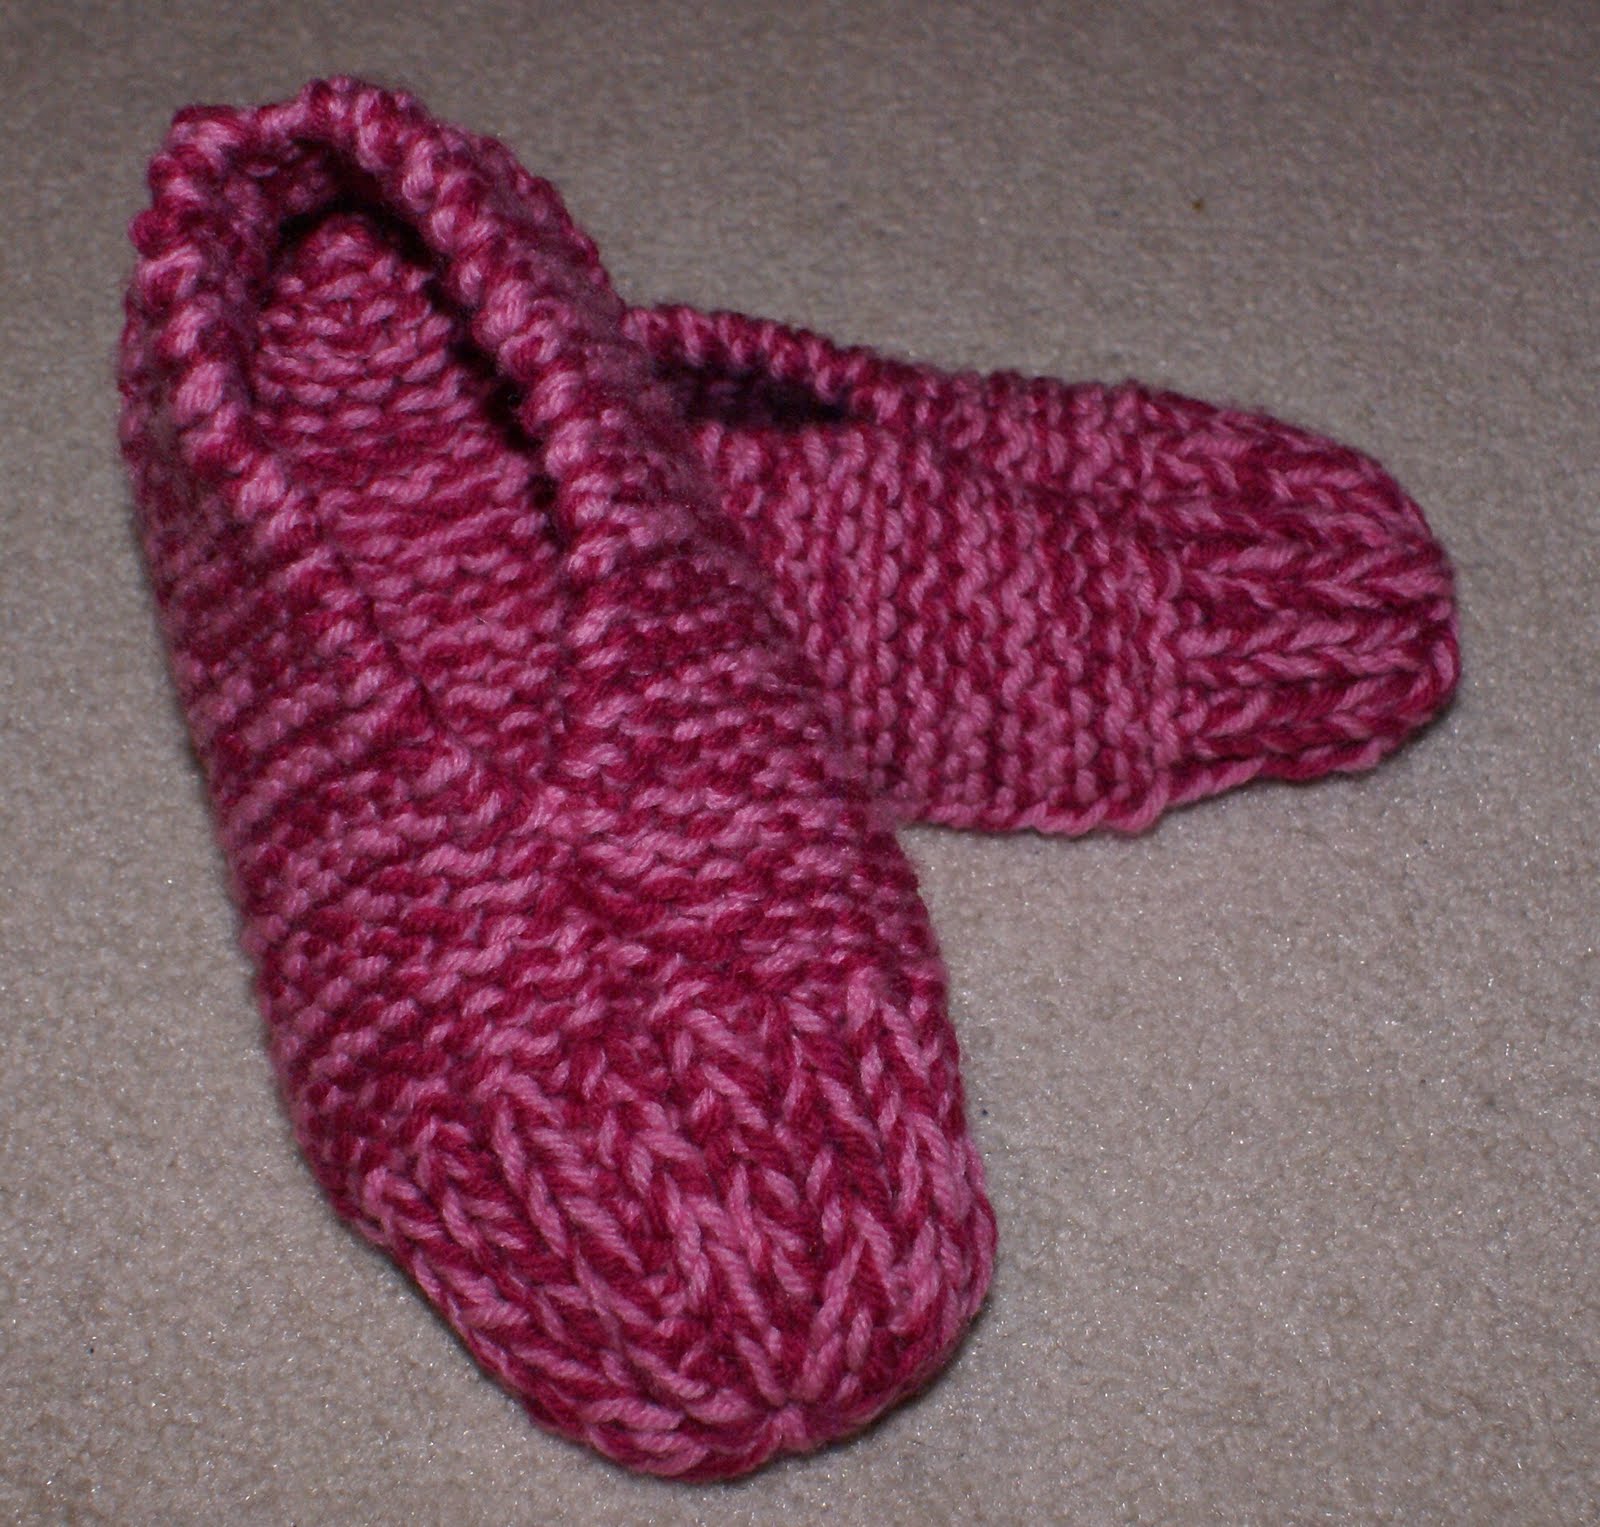 Cookie's Chronicles: Easy & quick knitting project ...